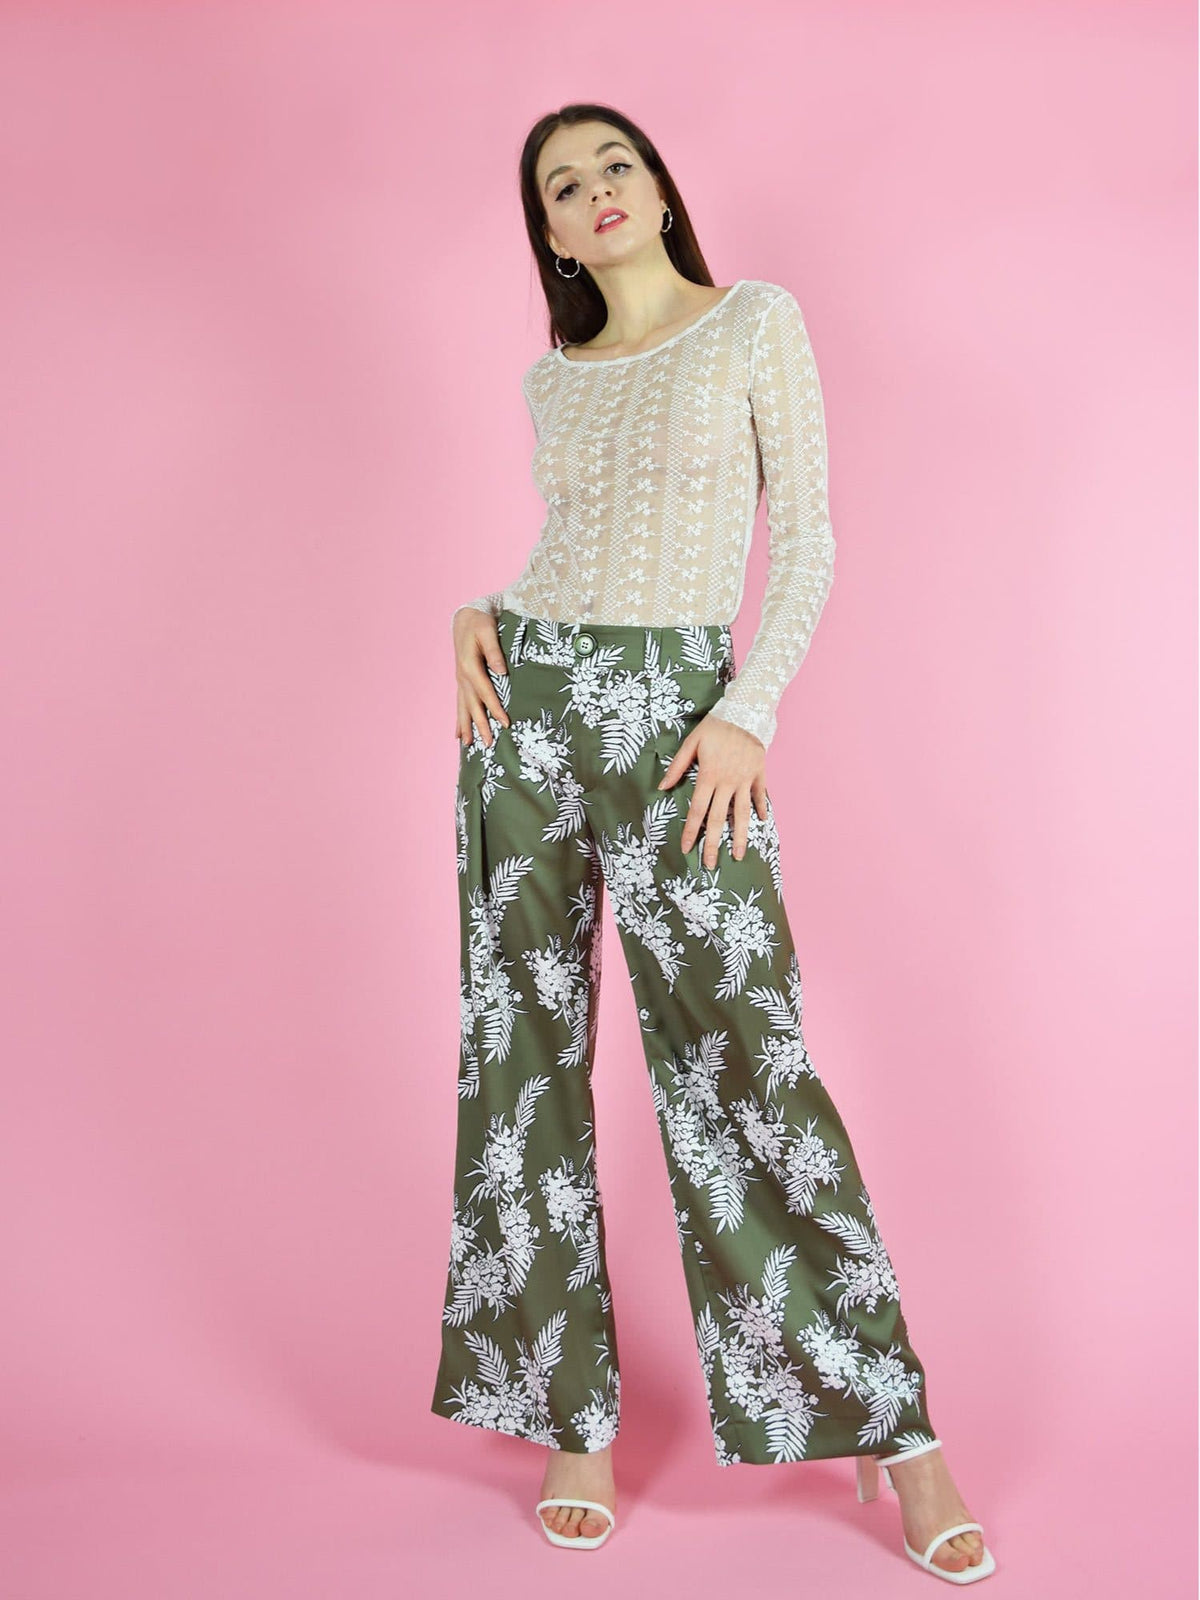 blonde gone rogue's girlboss green sustainable trousers have a wide leg, high-waist design. The pants are made from a beautiful, silky green fabric with white floral print. Paired with the daily long sleeve lace top.